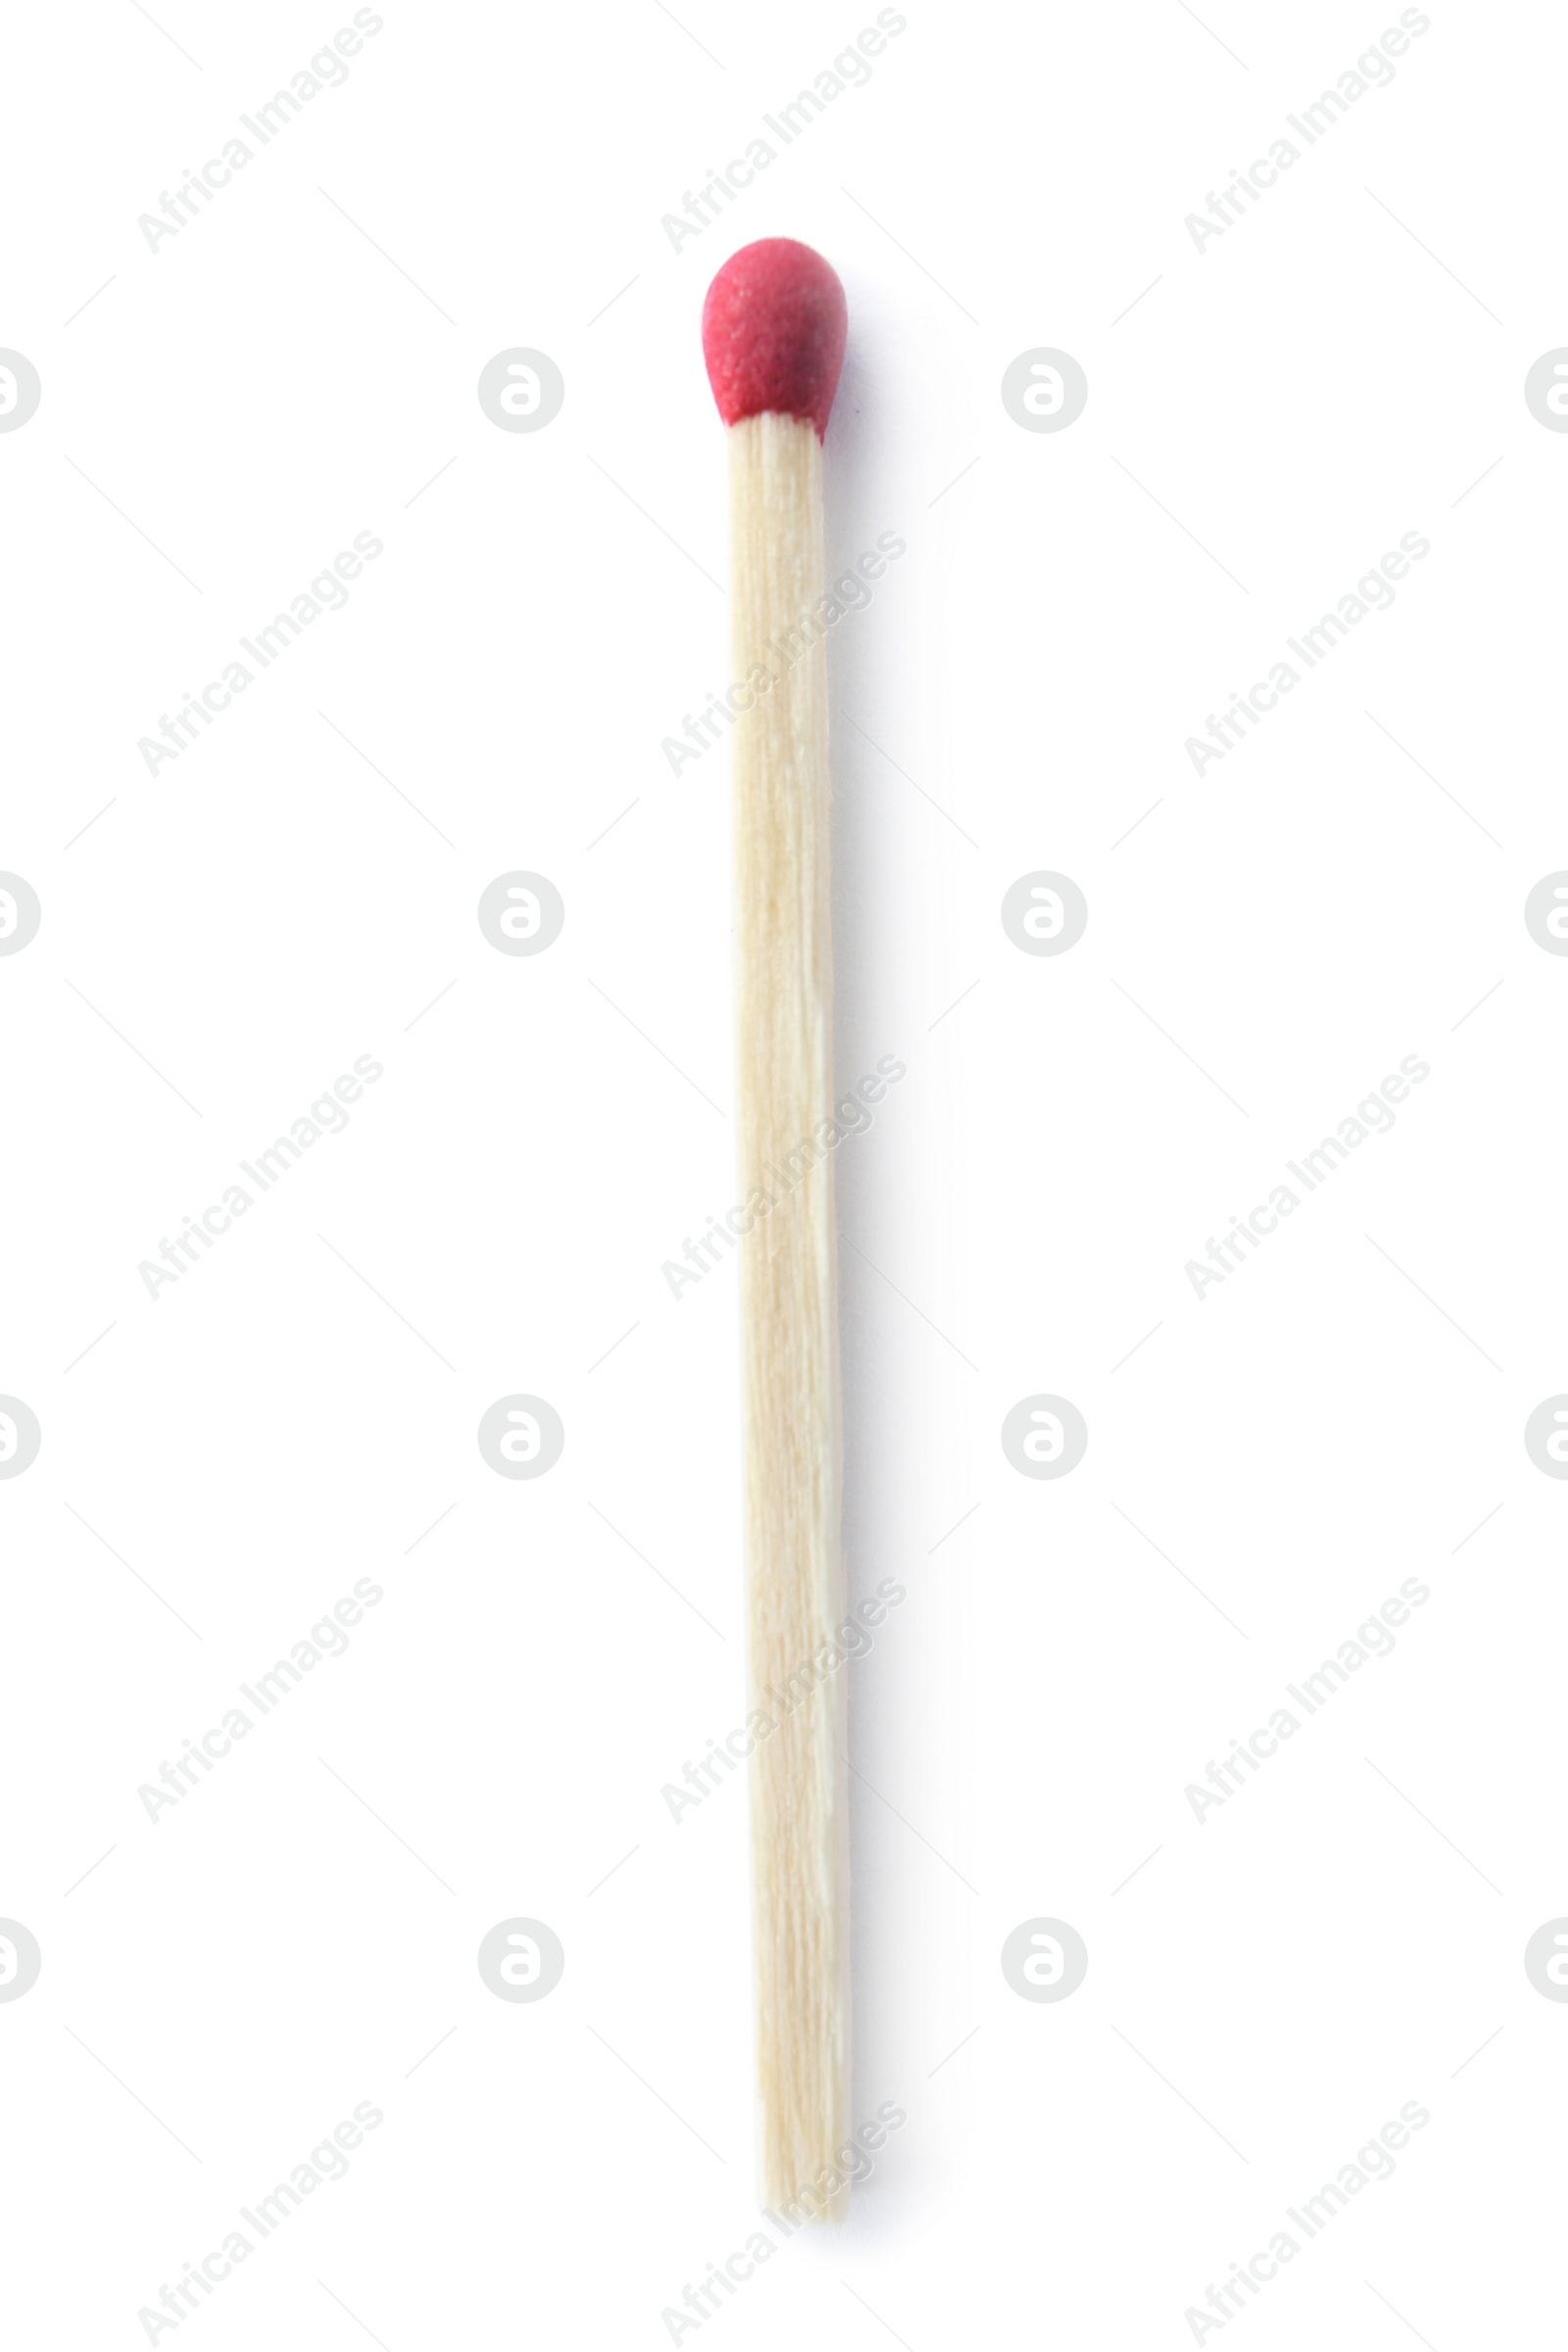 Photo of Wooden match on white background, top view